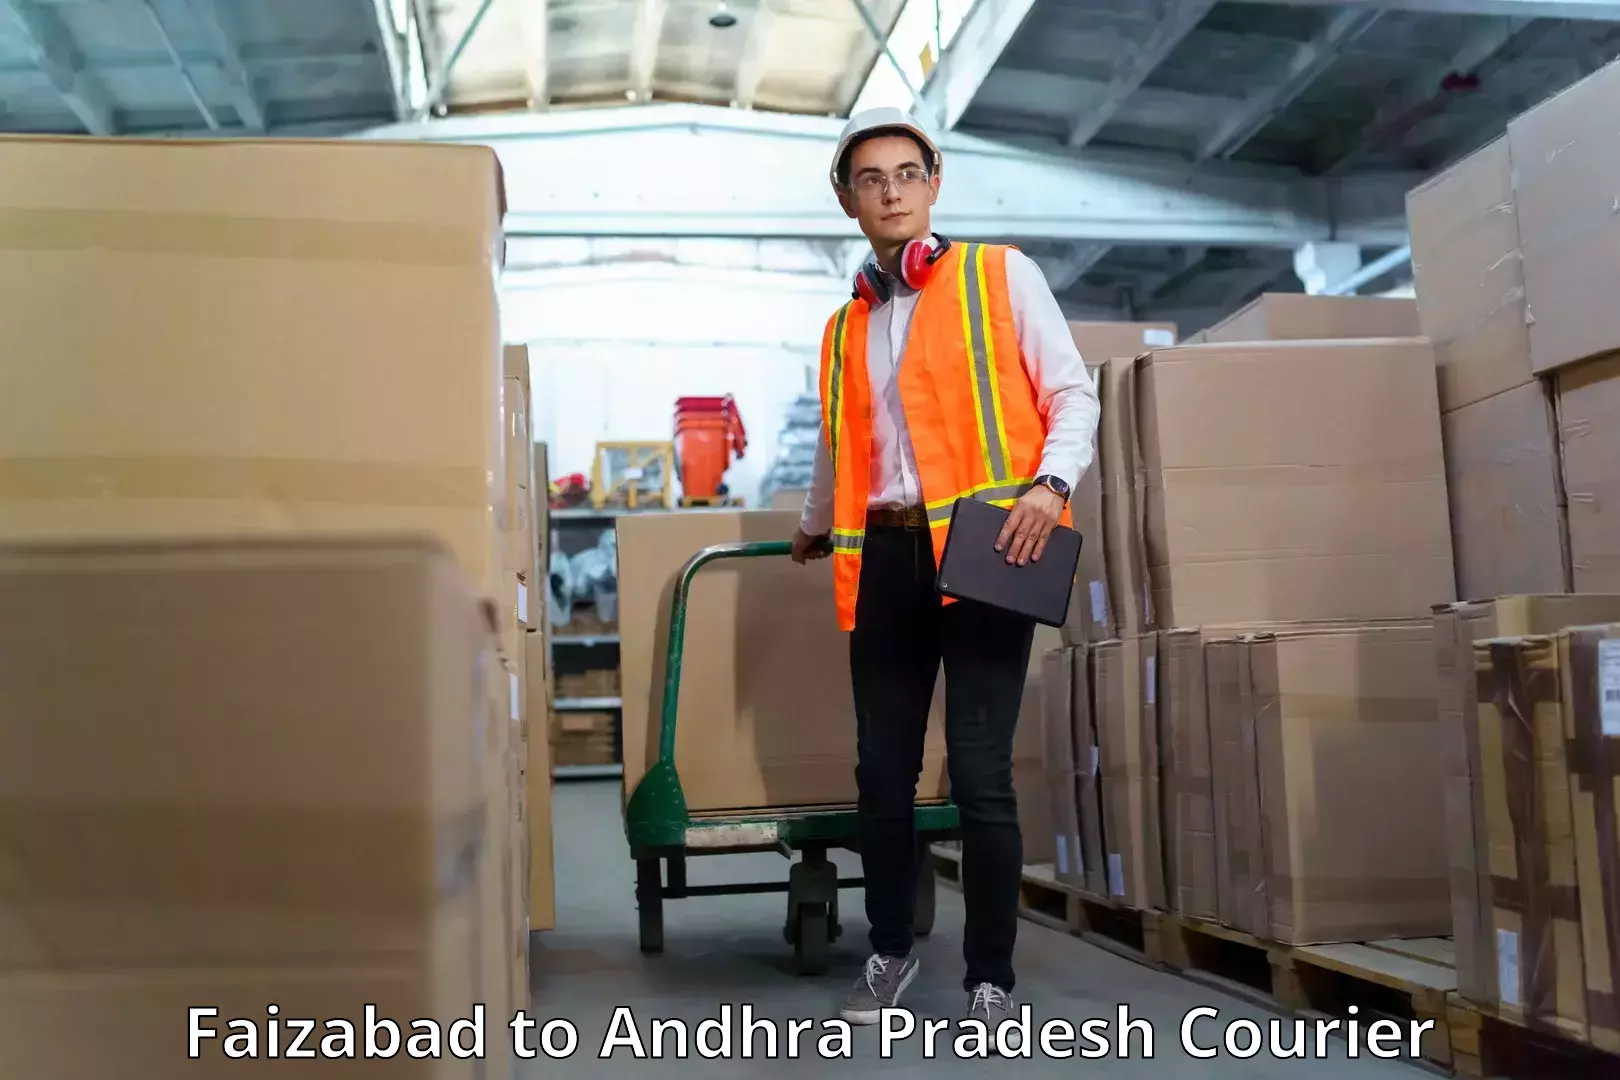 Subscription-based courier Faizabad to Akividu